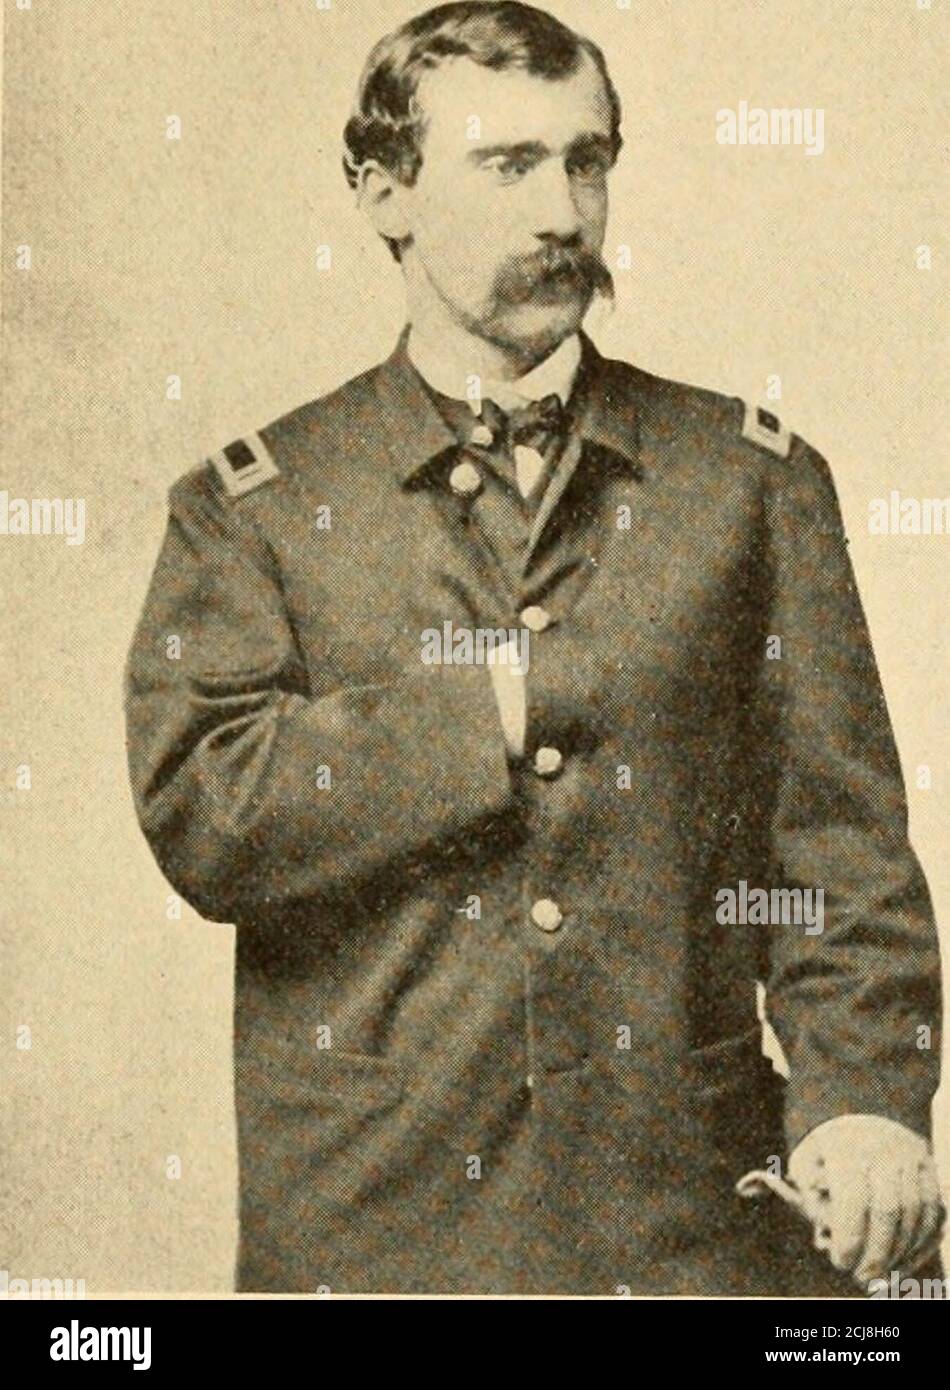 . Memoirs of the war of '61. Colonel Charles Russell Lowell, friends and cousins . w York City, January 5, 1911.Second Lieutenant First Massachusetts Cav-alry, January 6, 1863. First Lieutenant FirstMassachusetts Cavalry, January 4, 1864. Cap-tain September i, 1864. Brevet Major U.S.Volunteers, April 9, 1865. In the Army of thePotomac to the end of the war. He resignedMay 27, 1865. (Original Companion of theMilitary Order of the Loyal Legion.) James Jackson Higginson had been fitted inthe Boston Latin School for his entrance toHarvard College from which he was graduatedwith honor in 1857. Afte Stock Photo